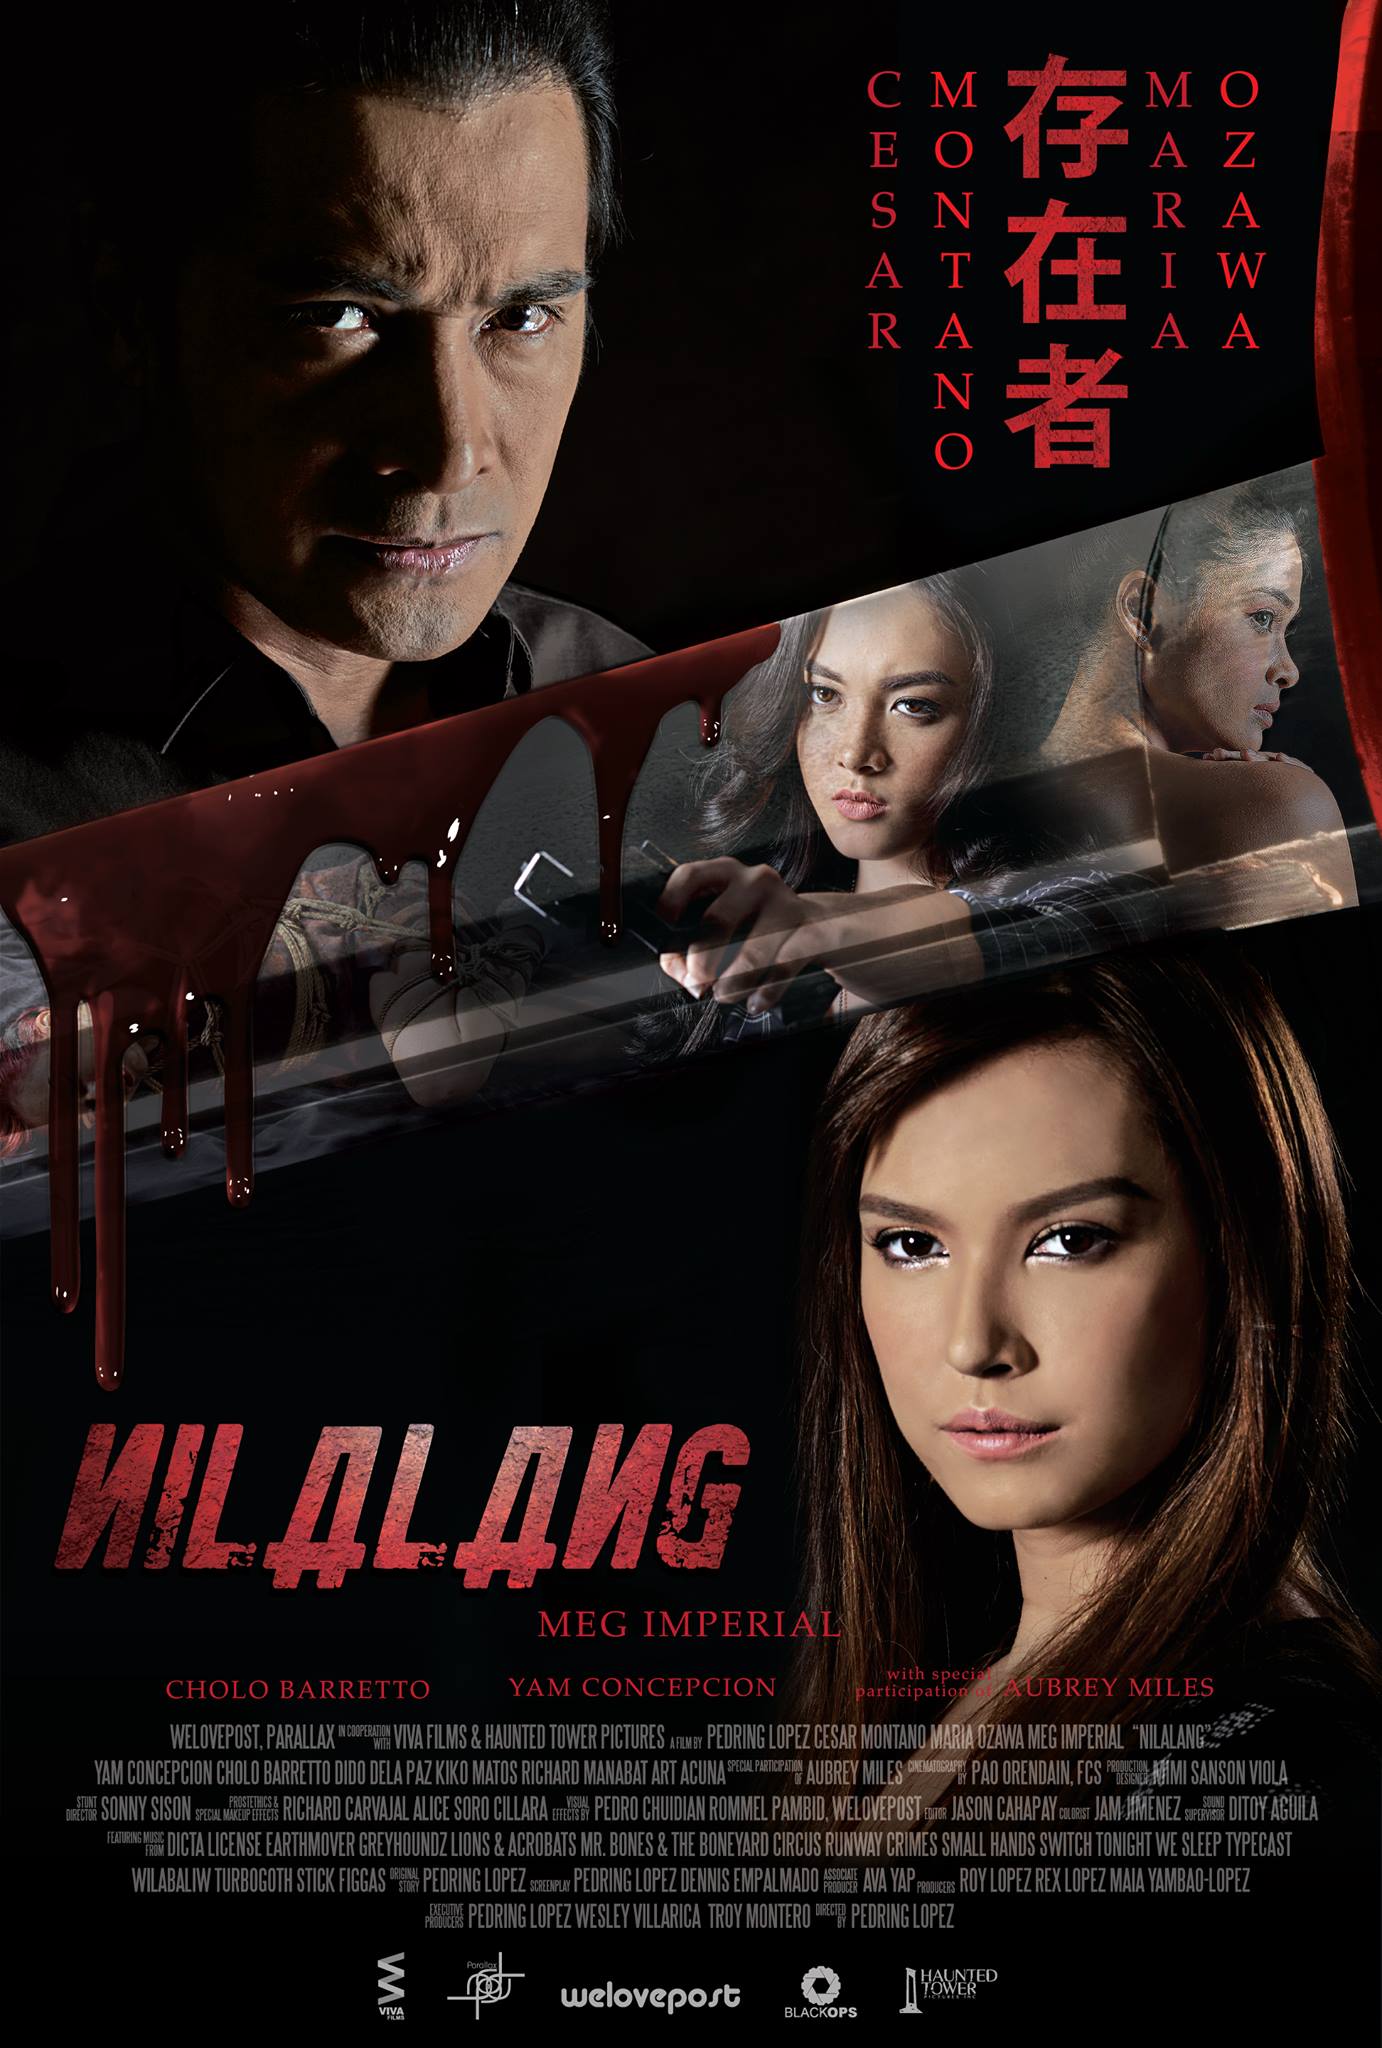 Nilalang - Entity WeLovePost and Parallax in cooperation with Viva Films and Haunted Tower Pictures present "NILALANG", a suspense-action-thriller by Pedring Lopez, starring award-winning actor Cesar Montano and hot Japanese star Maria Ozawa. A finalist of Metro Manila Film Festival 2015, "NILALANG" also stars Meg Imperial, Cholo Barretto, Yam Concepcion, Kiko Matos, Dido dela Paz, Richard Manabat, Art Acuña, and with the special participation of Aubrey Miles... Executive Producers are Pedring Lopez, Wesley Villarica, and Troy Montero... Opens December 25 in cinemas nationwide!